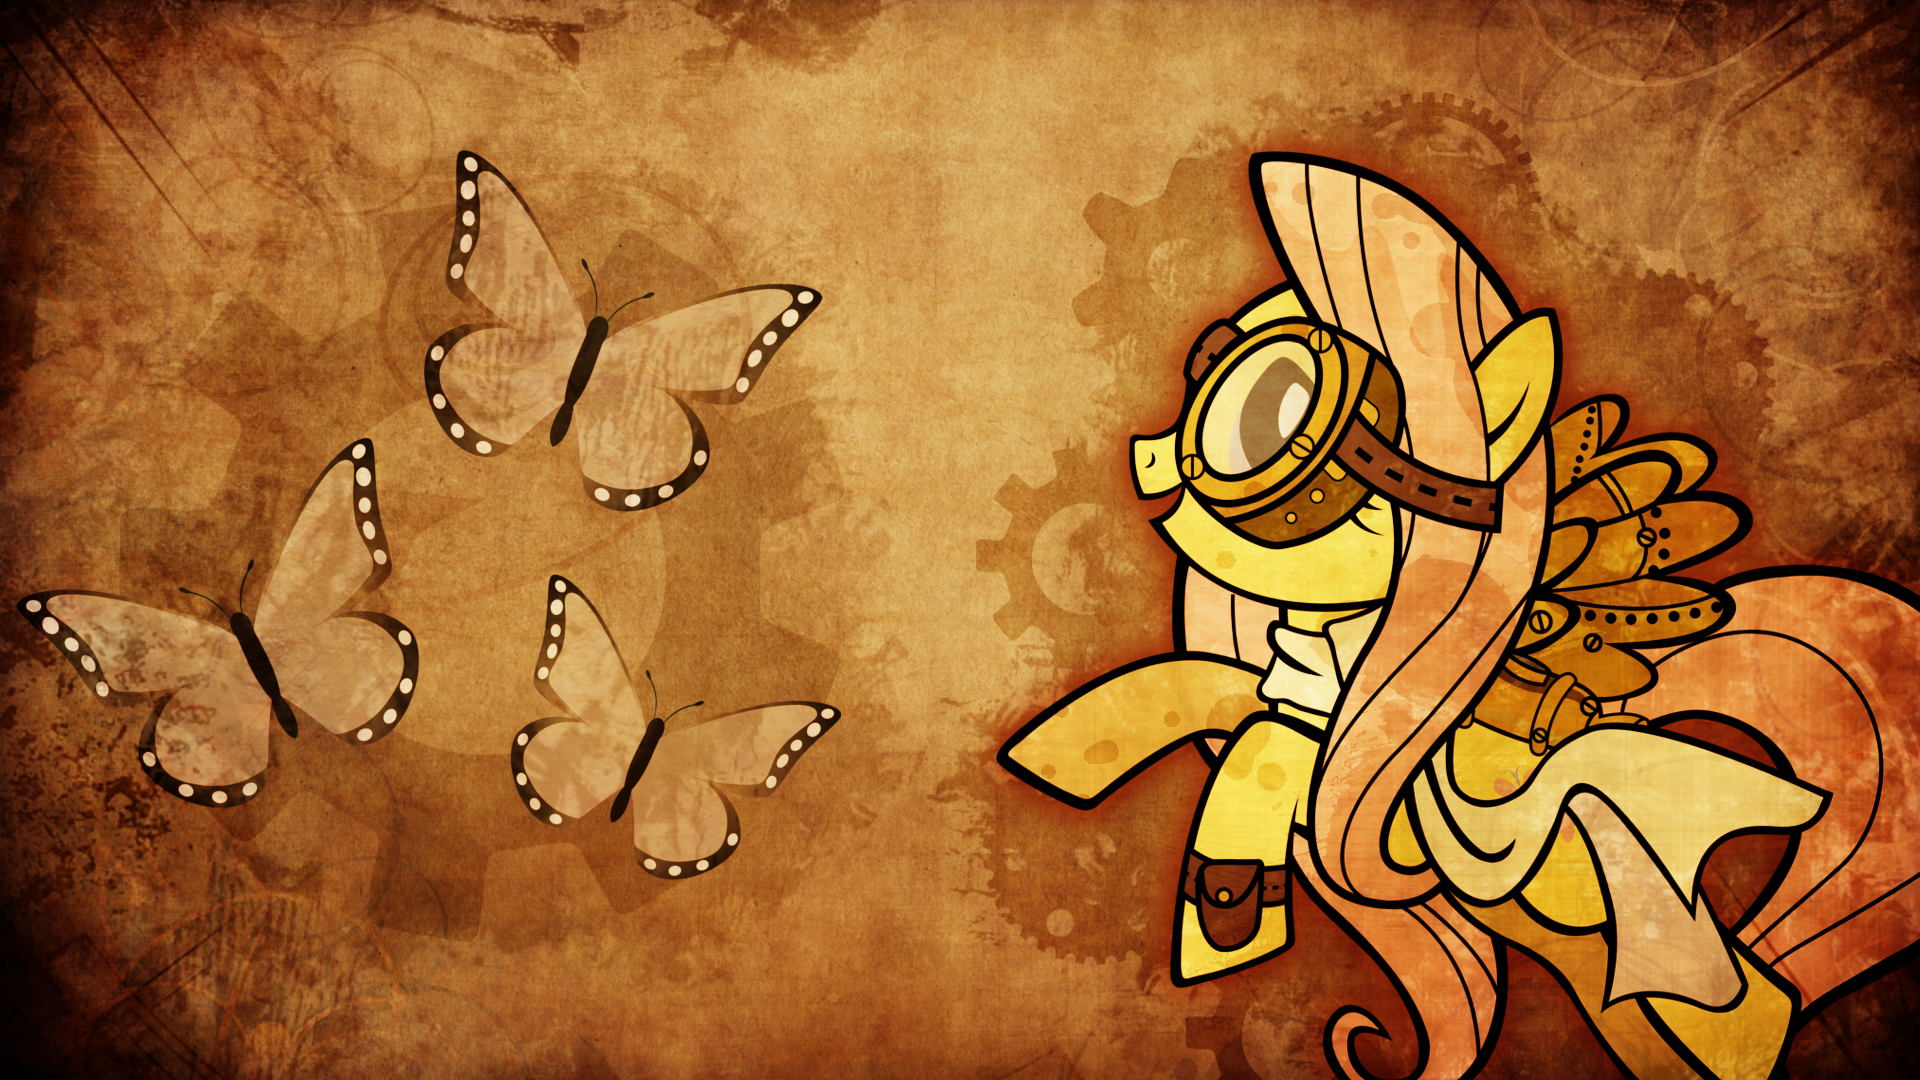 Steampunk Fluttershy Wallpaper by arghus, Jmanzor, mowza2k2 and UP1TER